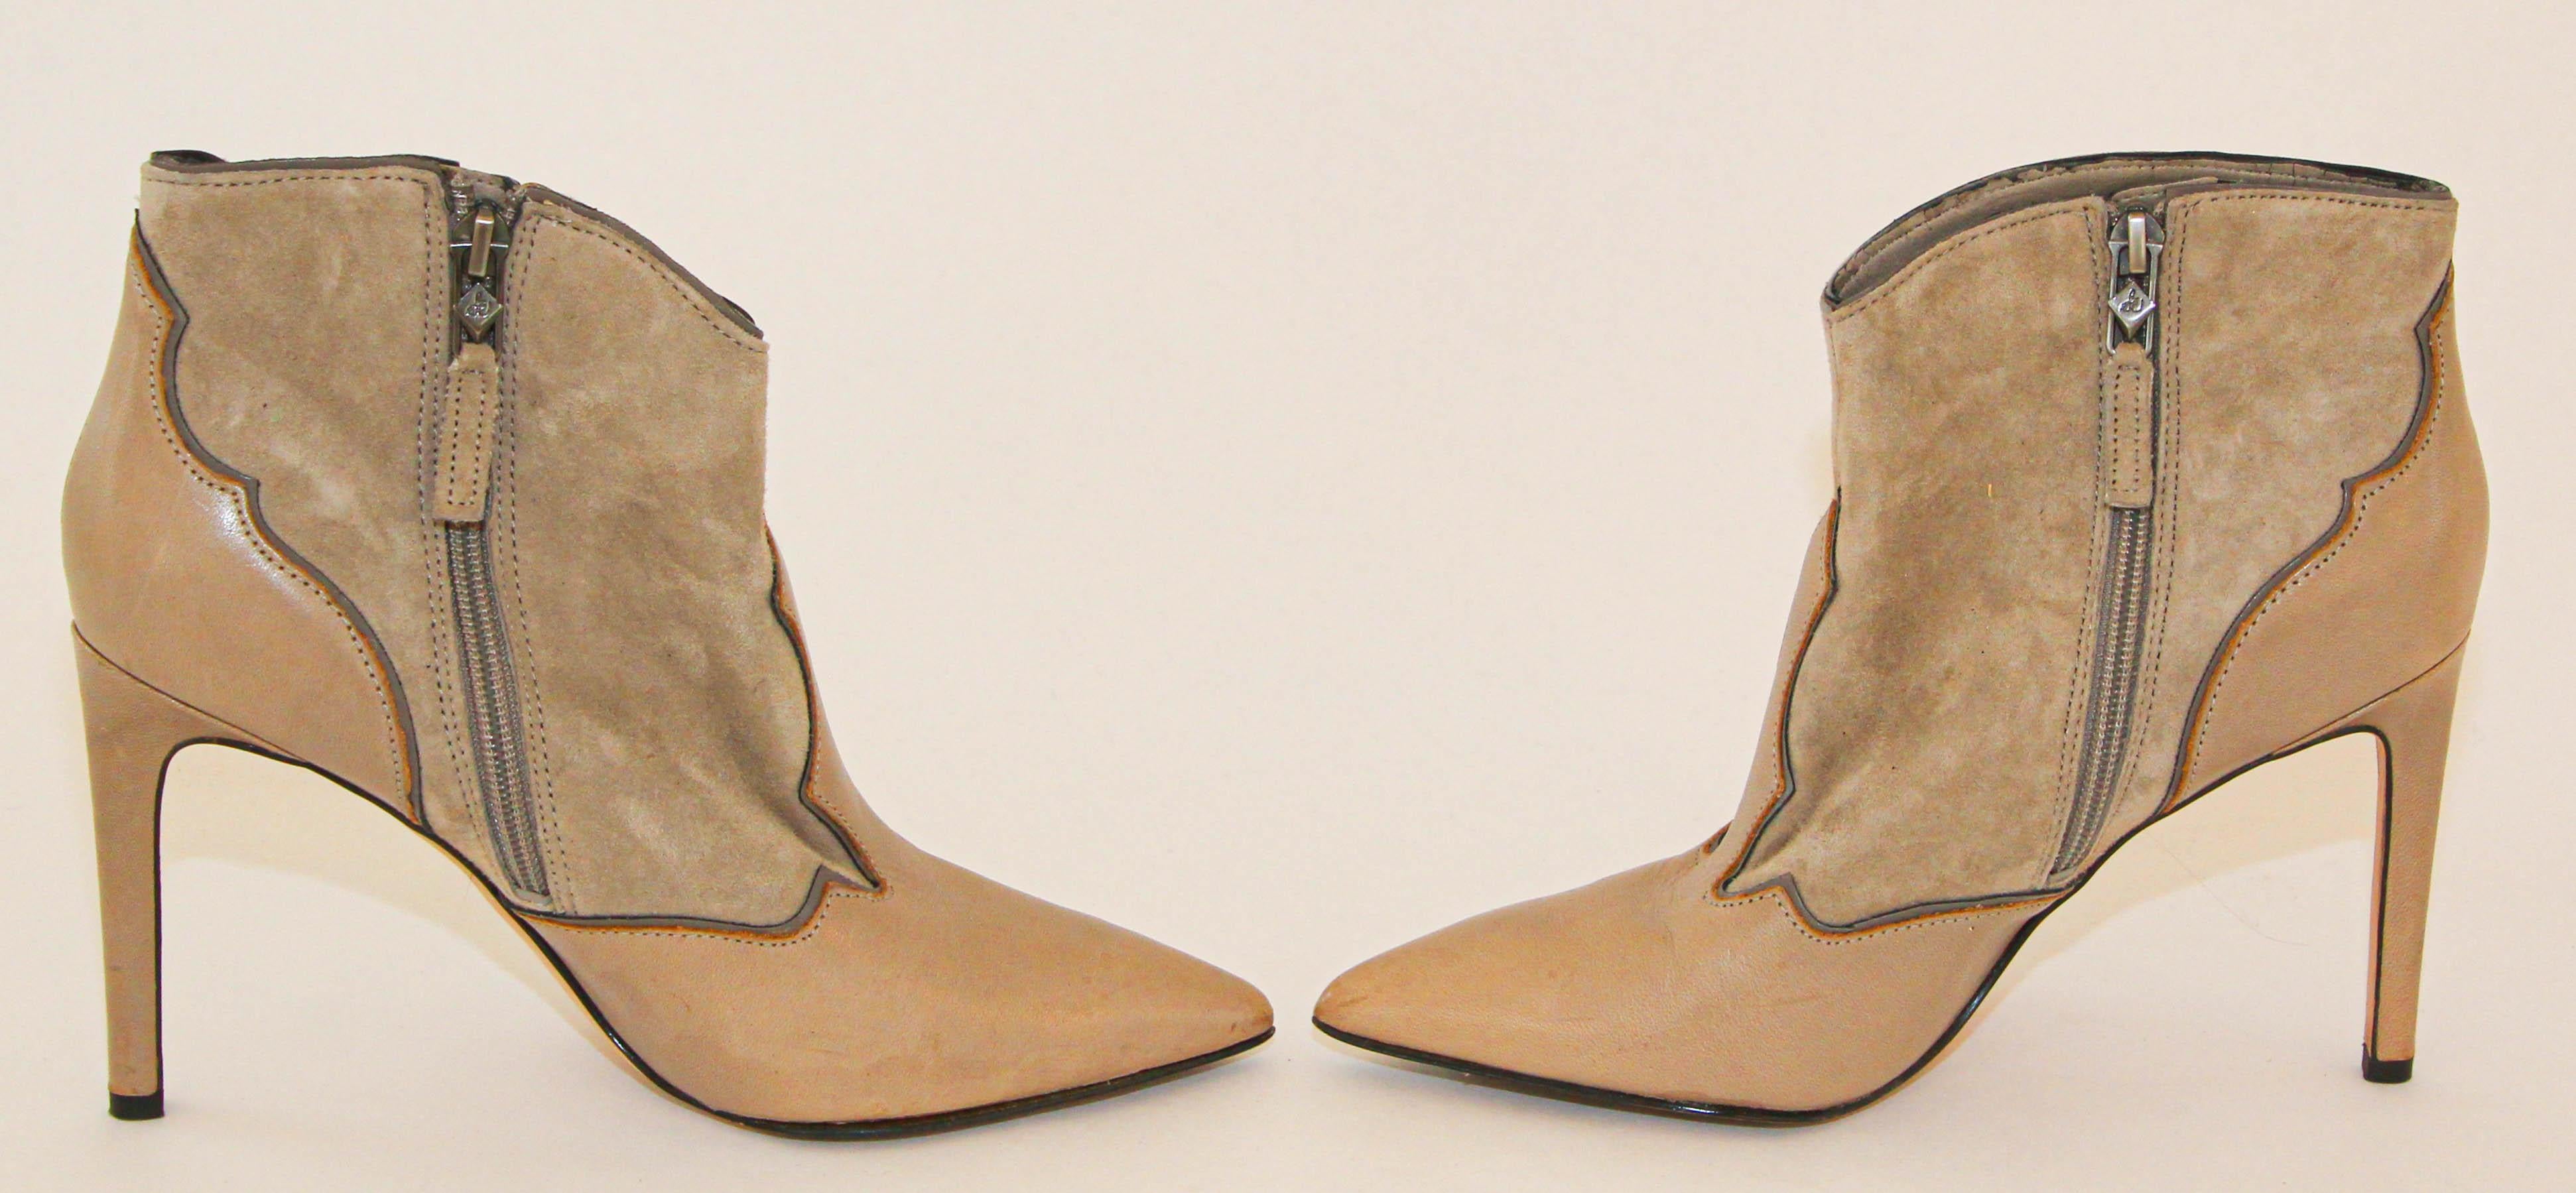 Sam Edelman High Heels Tan Leather Women Ankle Booties Stiletto Size 7 For Sale 2